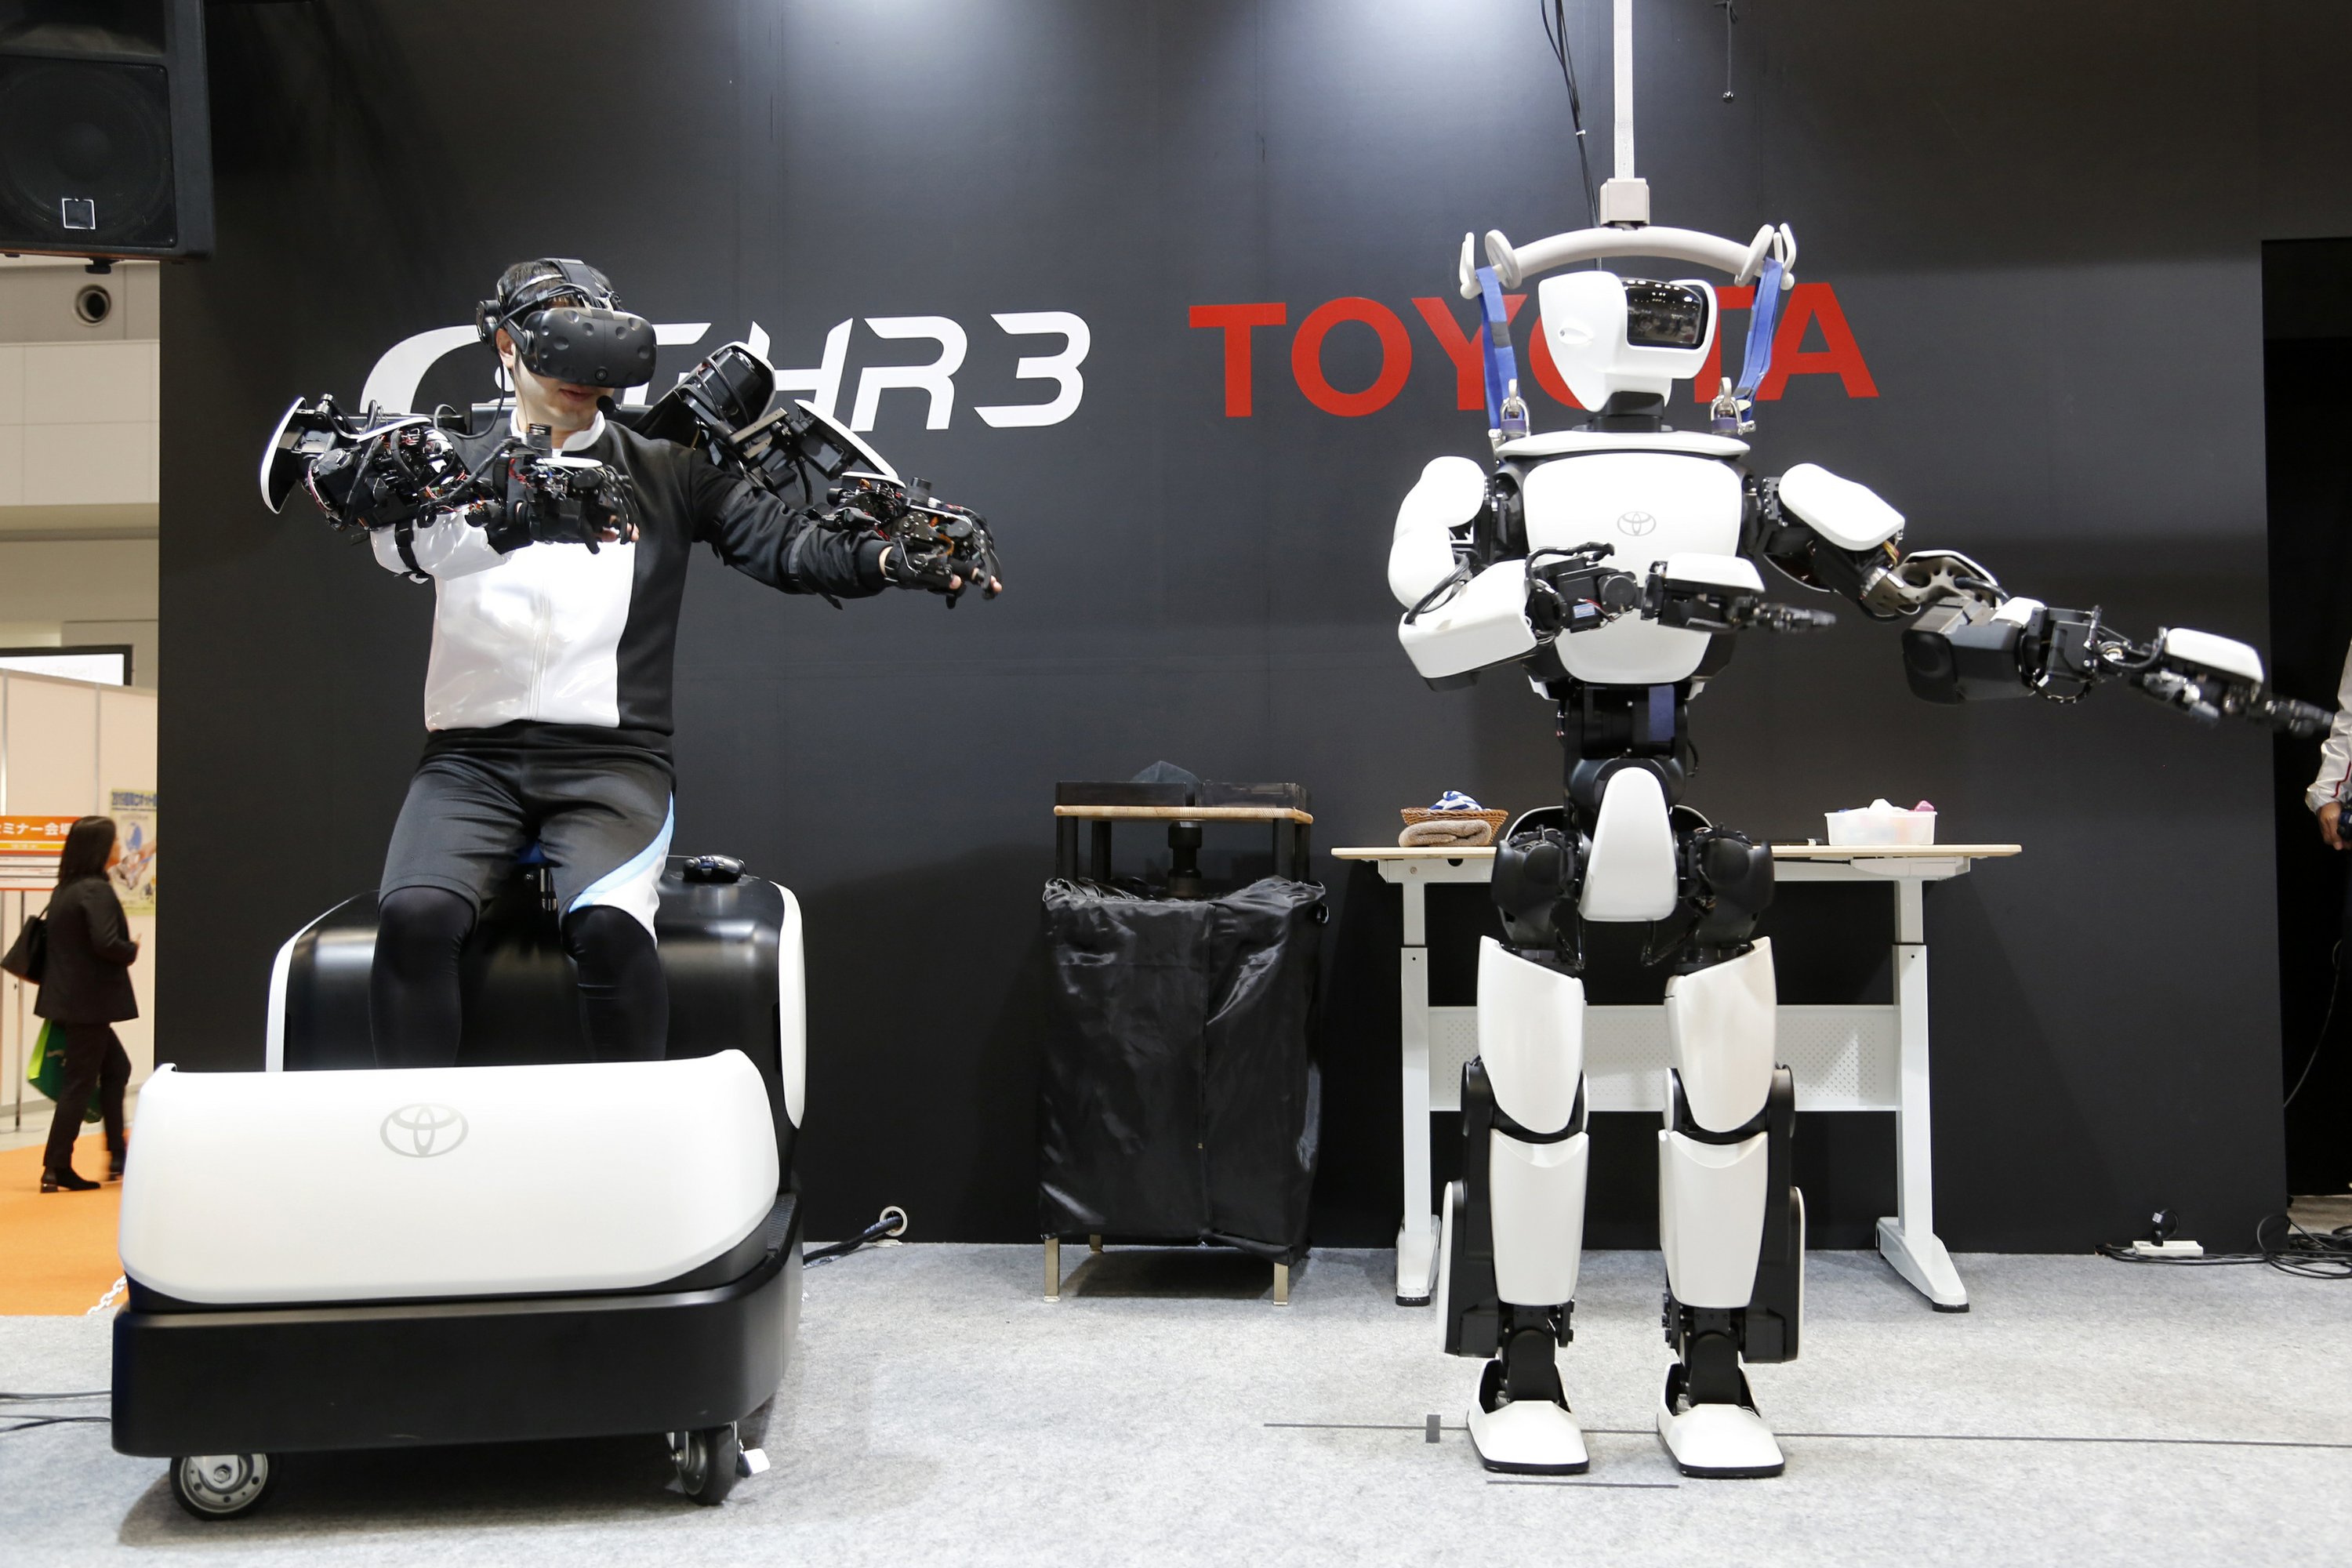 unveils upgraded version of its robot | News